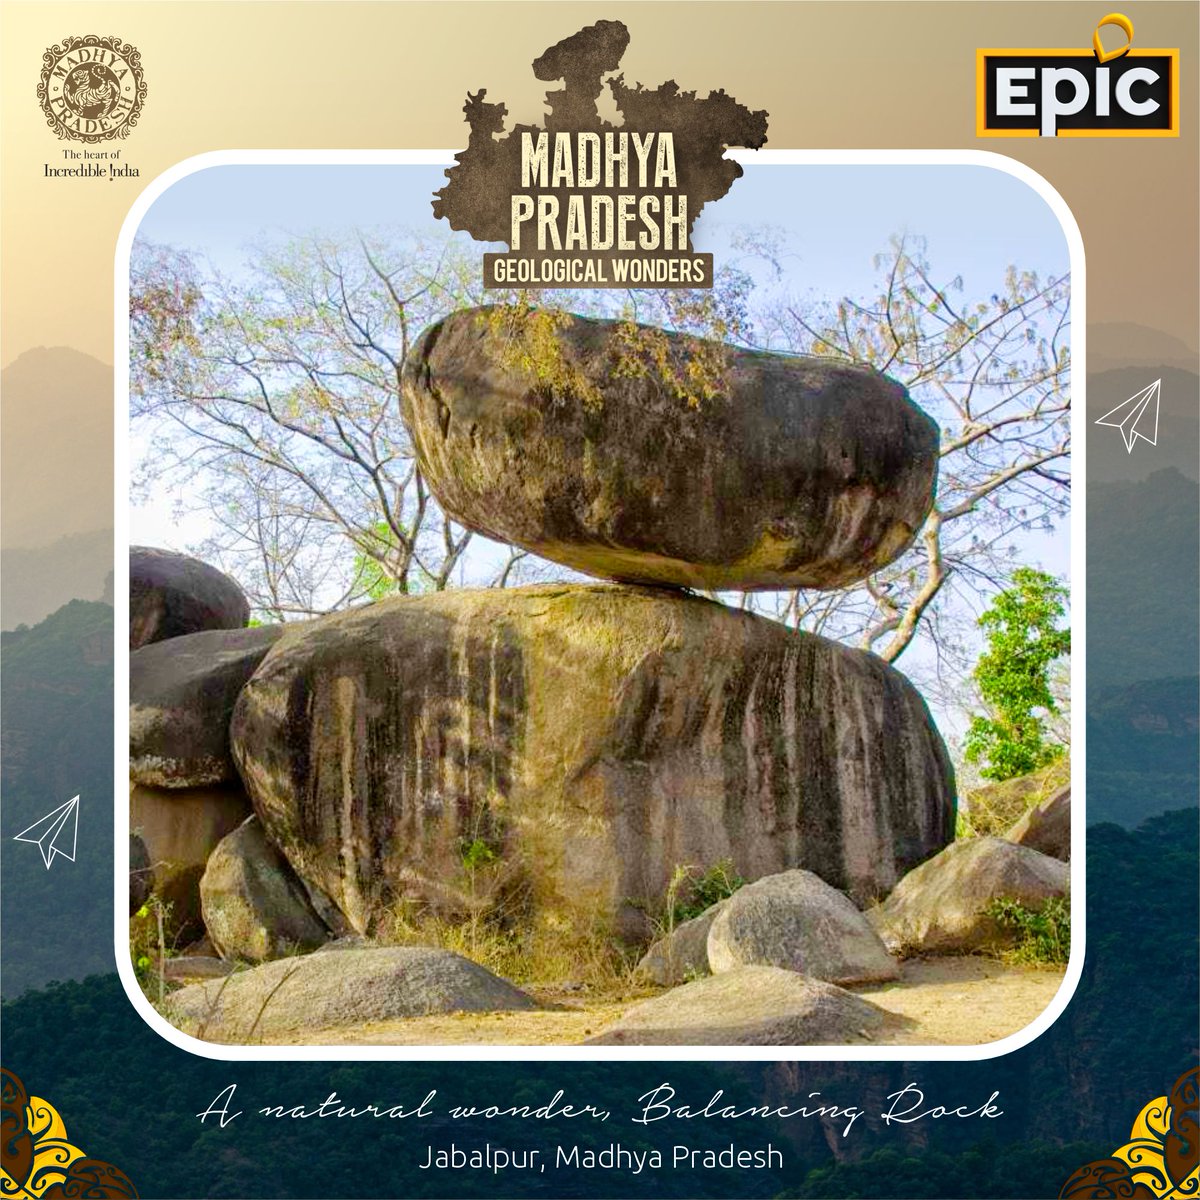 The Balancing Rocks of Jabalpur are absolutely incredible! 🤩 They defy gravity and stand tall, defying all odds! 😲 These ancient marvels are a true testament to the wonders of nature. #JabalpurRocks #NatureIsAmazing #MindBlown 🌍🪨💫 @MPTourism @theepicon @avinashsachdev4